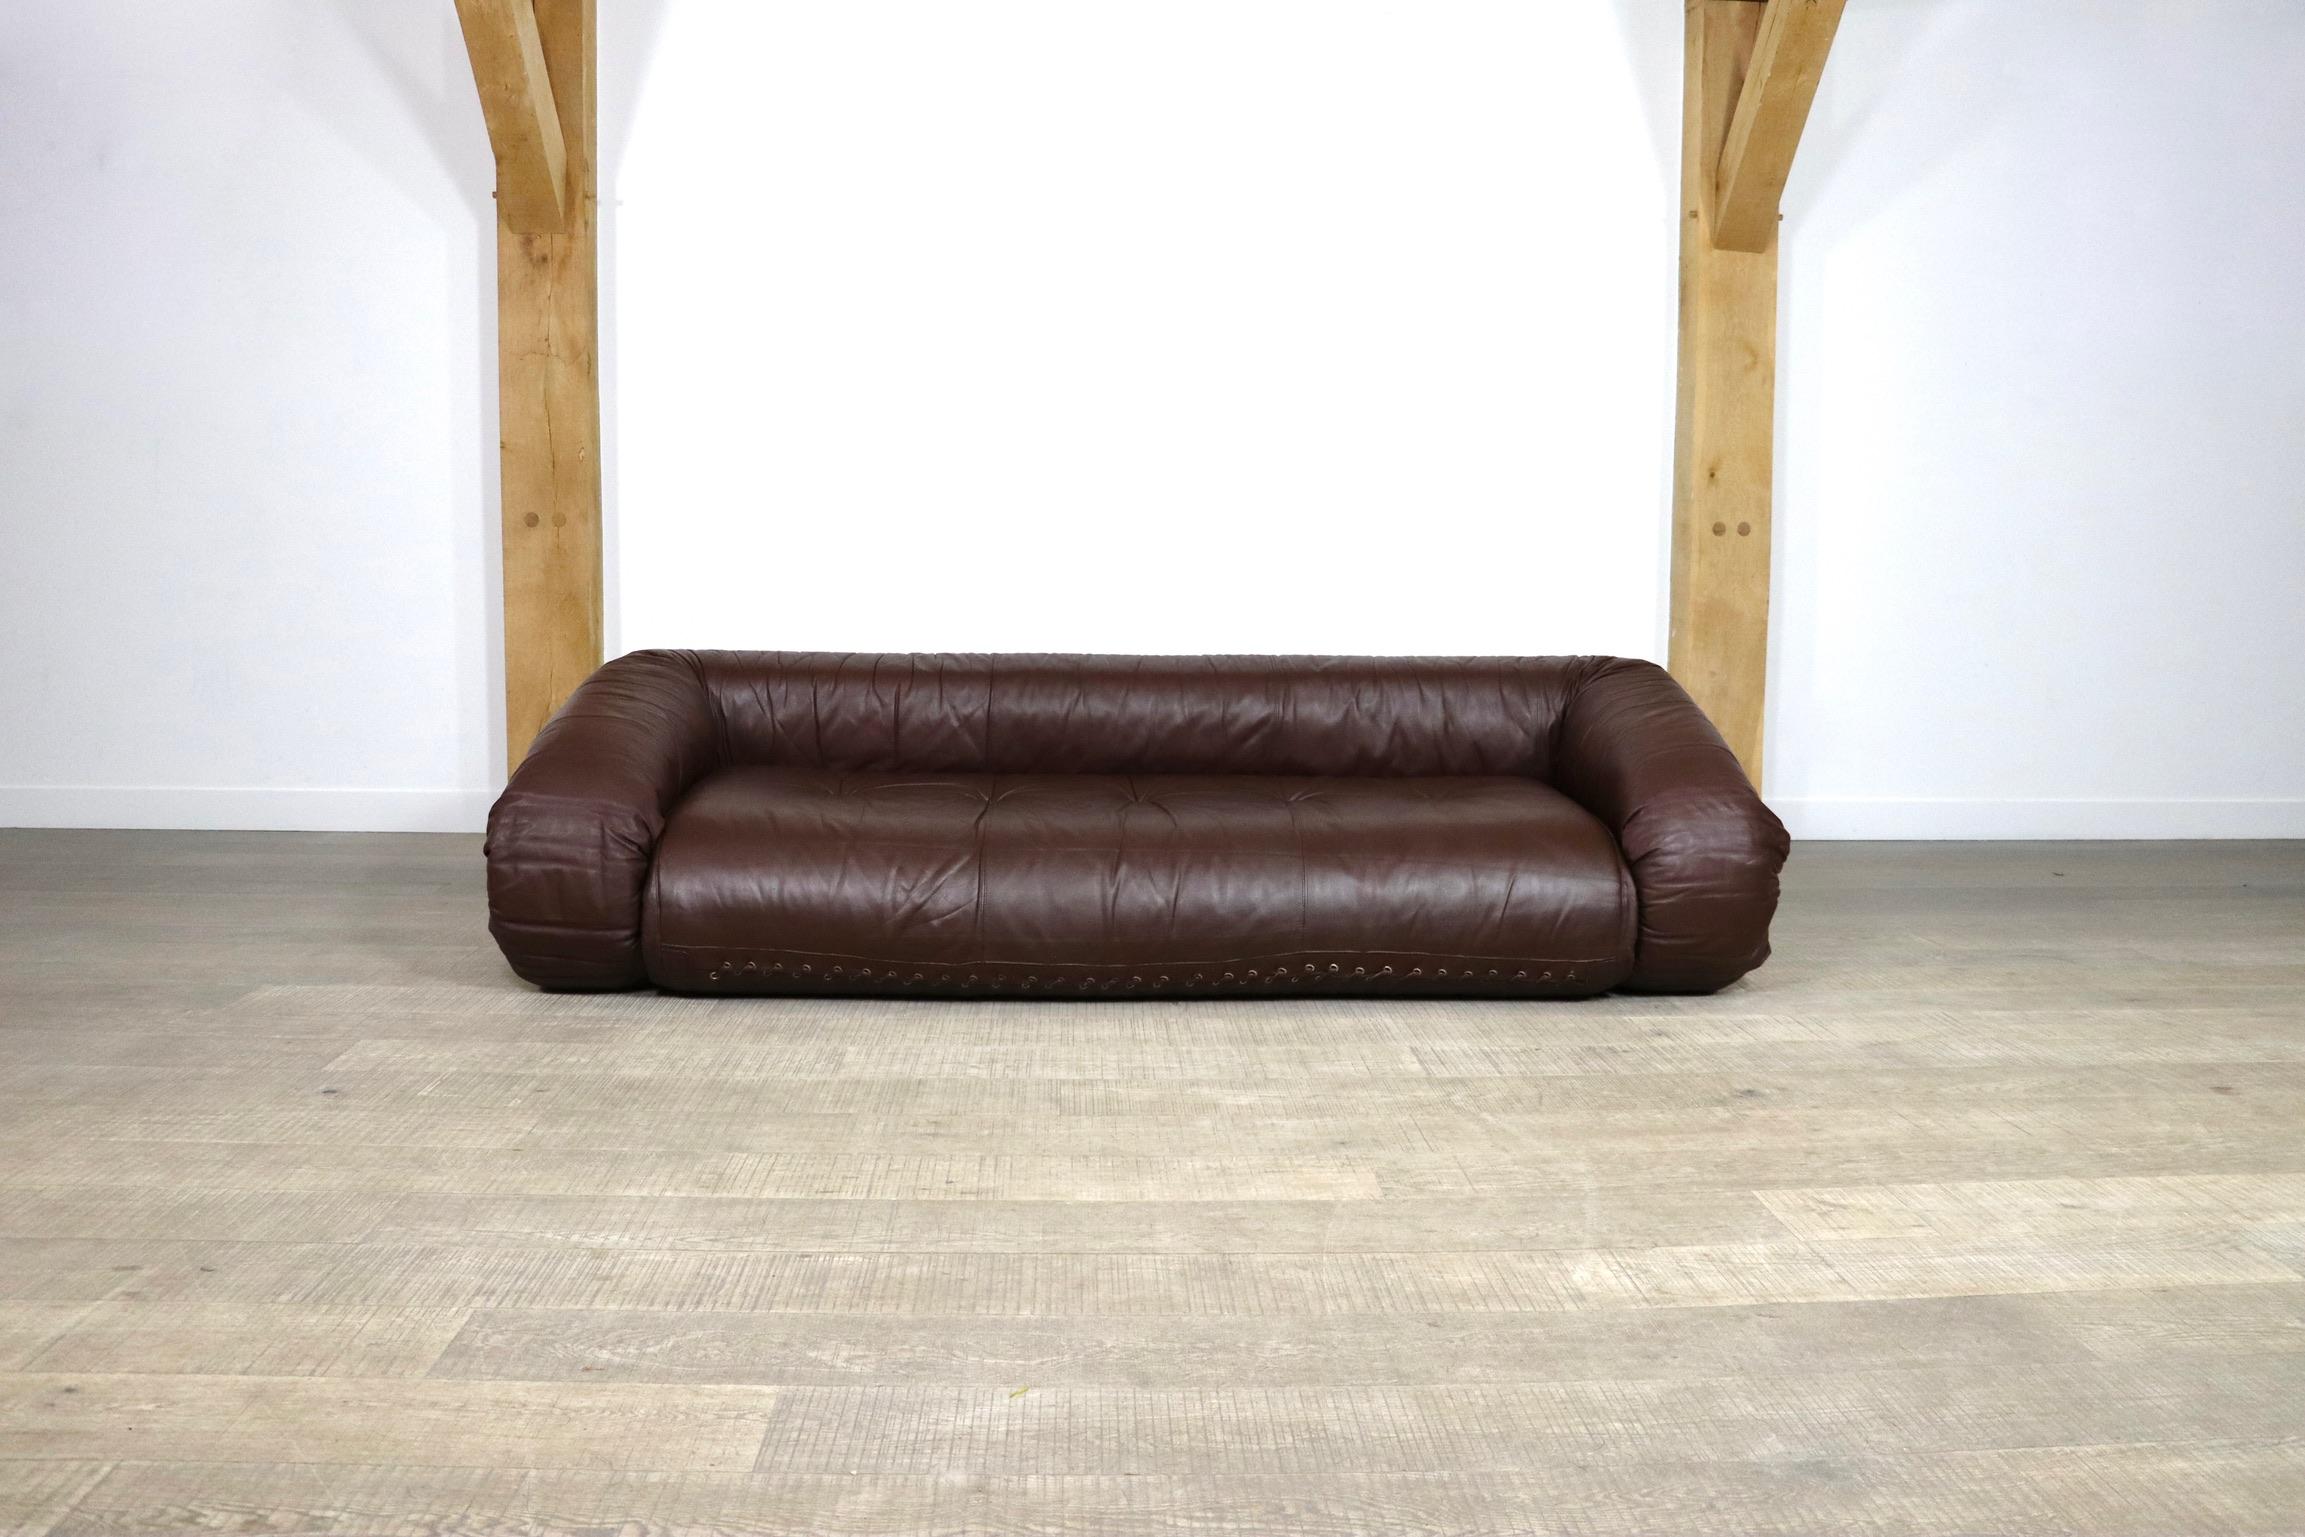 Incredible Anfibio sofa bed by Alessandro Becchi for Giovanetti Collezione Italy 1971. This stunning original brown leather upholstery fits perfectly with the white teddy fabric on the mattress inside. The sofa can easily be converted into a bed, or